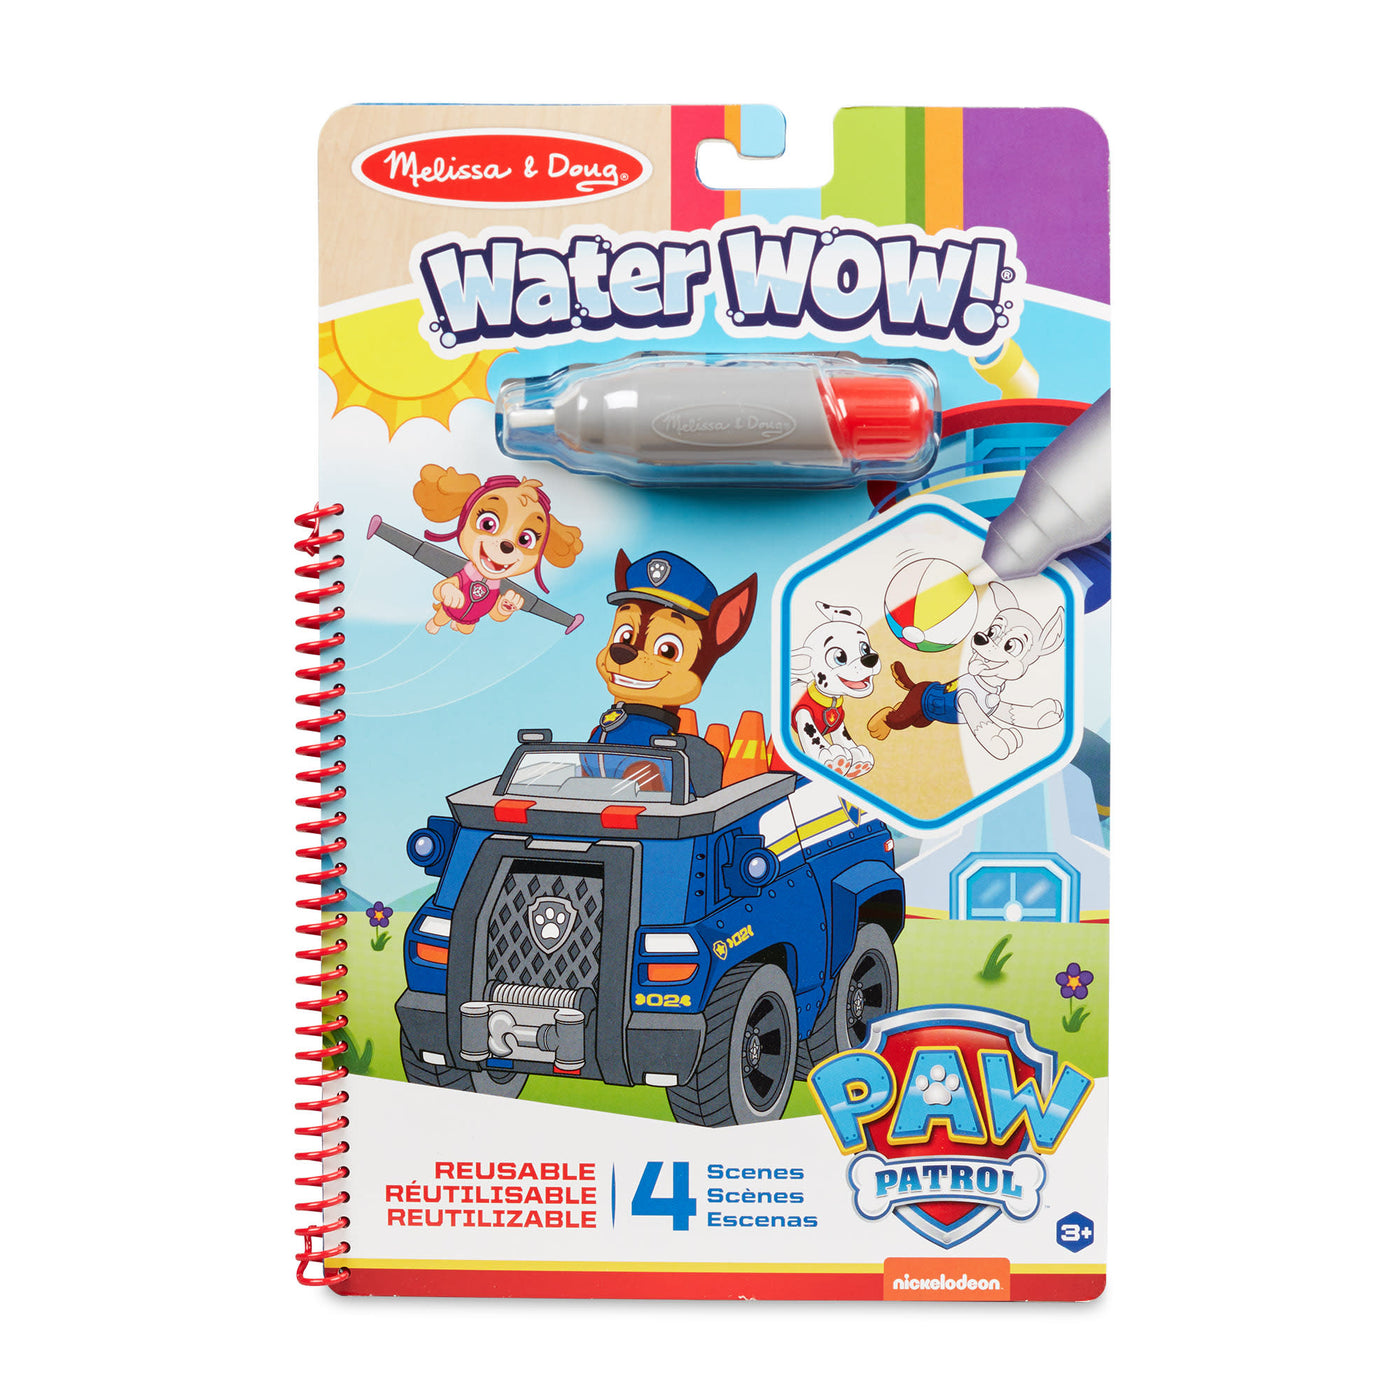 Melissa & Doug Water Wow! Under The Sea Water Reveal Pad - 9445